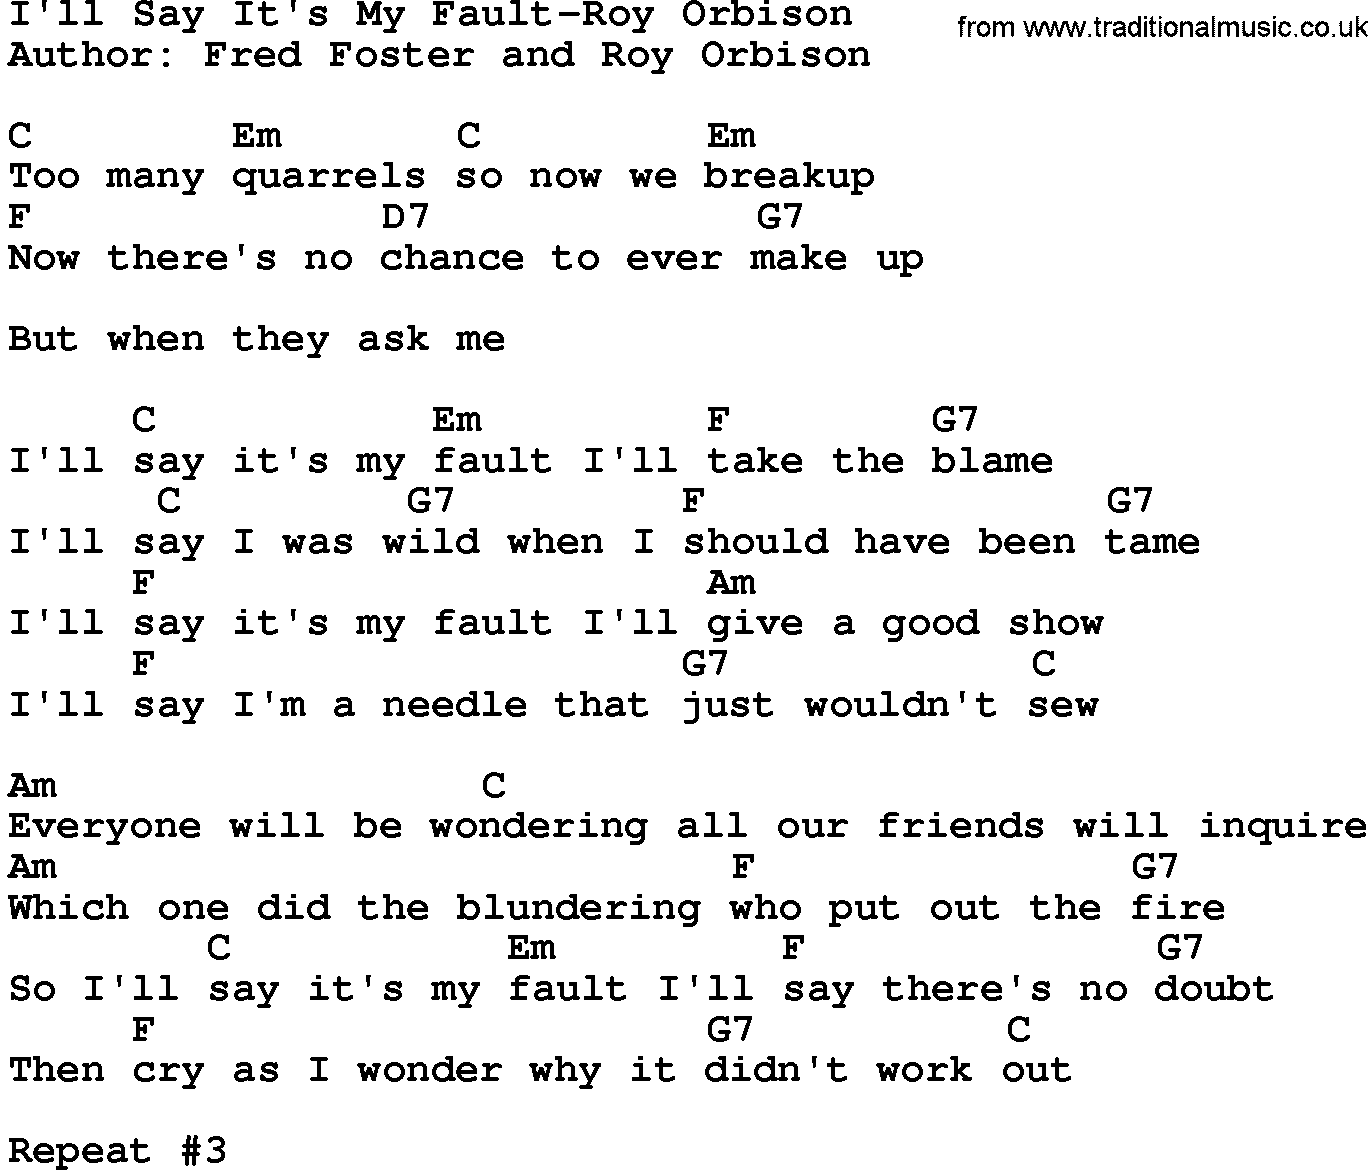 Country music song: I'll Say It's My Fault-Roy Orbison lyrics and chords